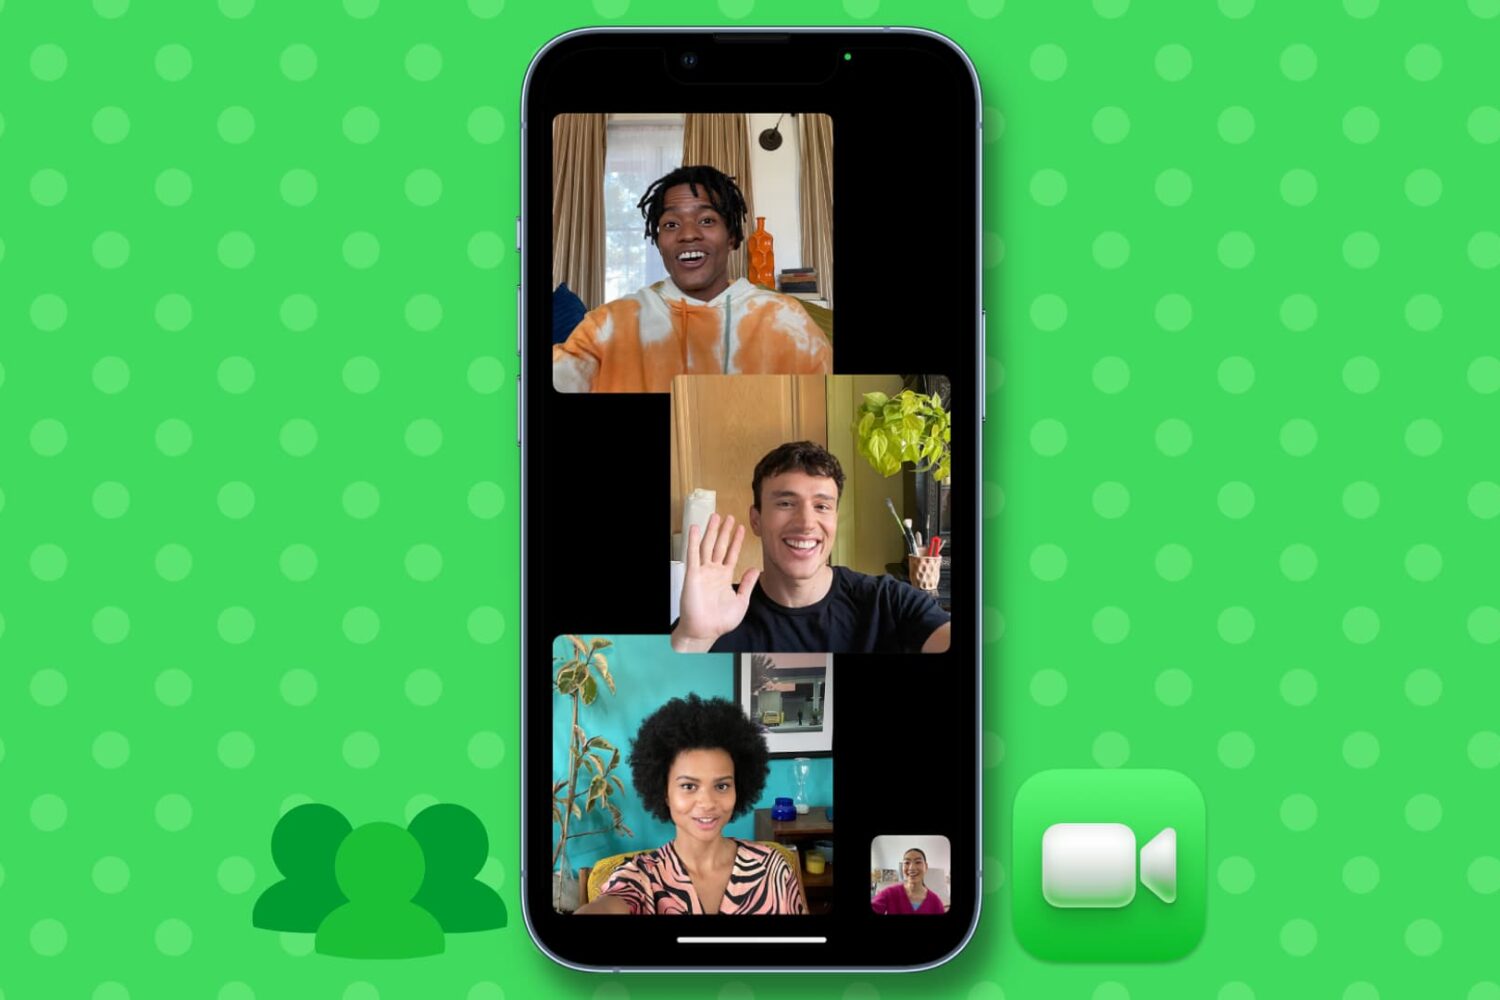 Ongoing Group FaceTime call on iPhone